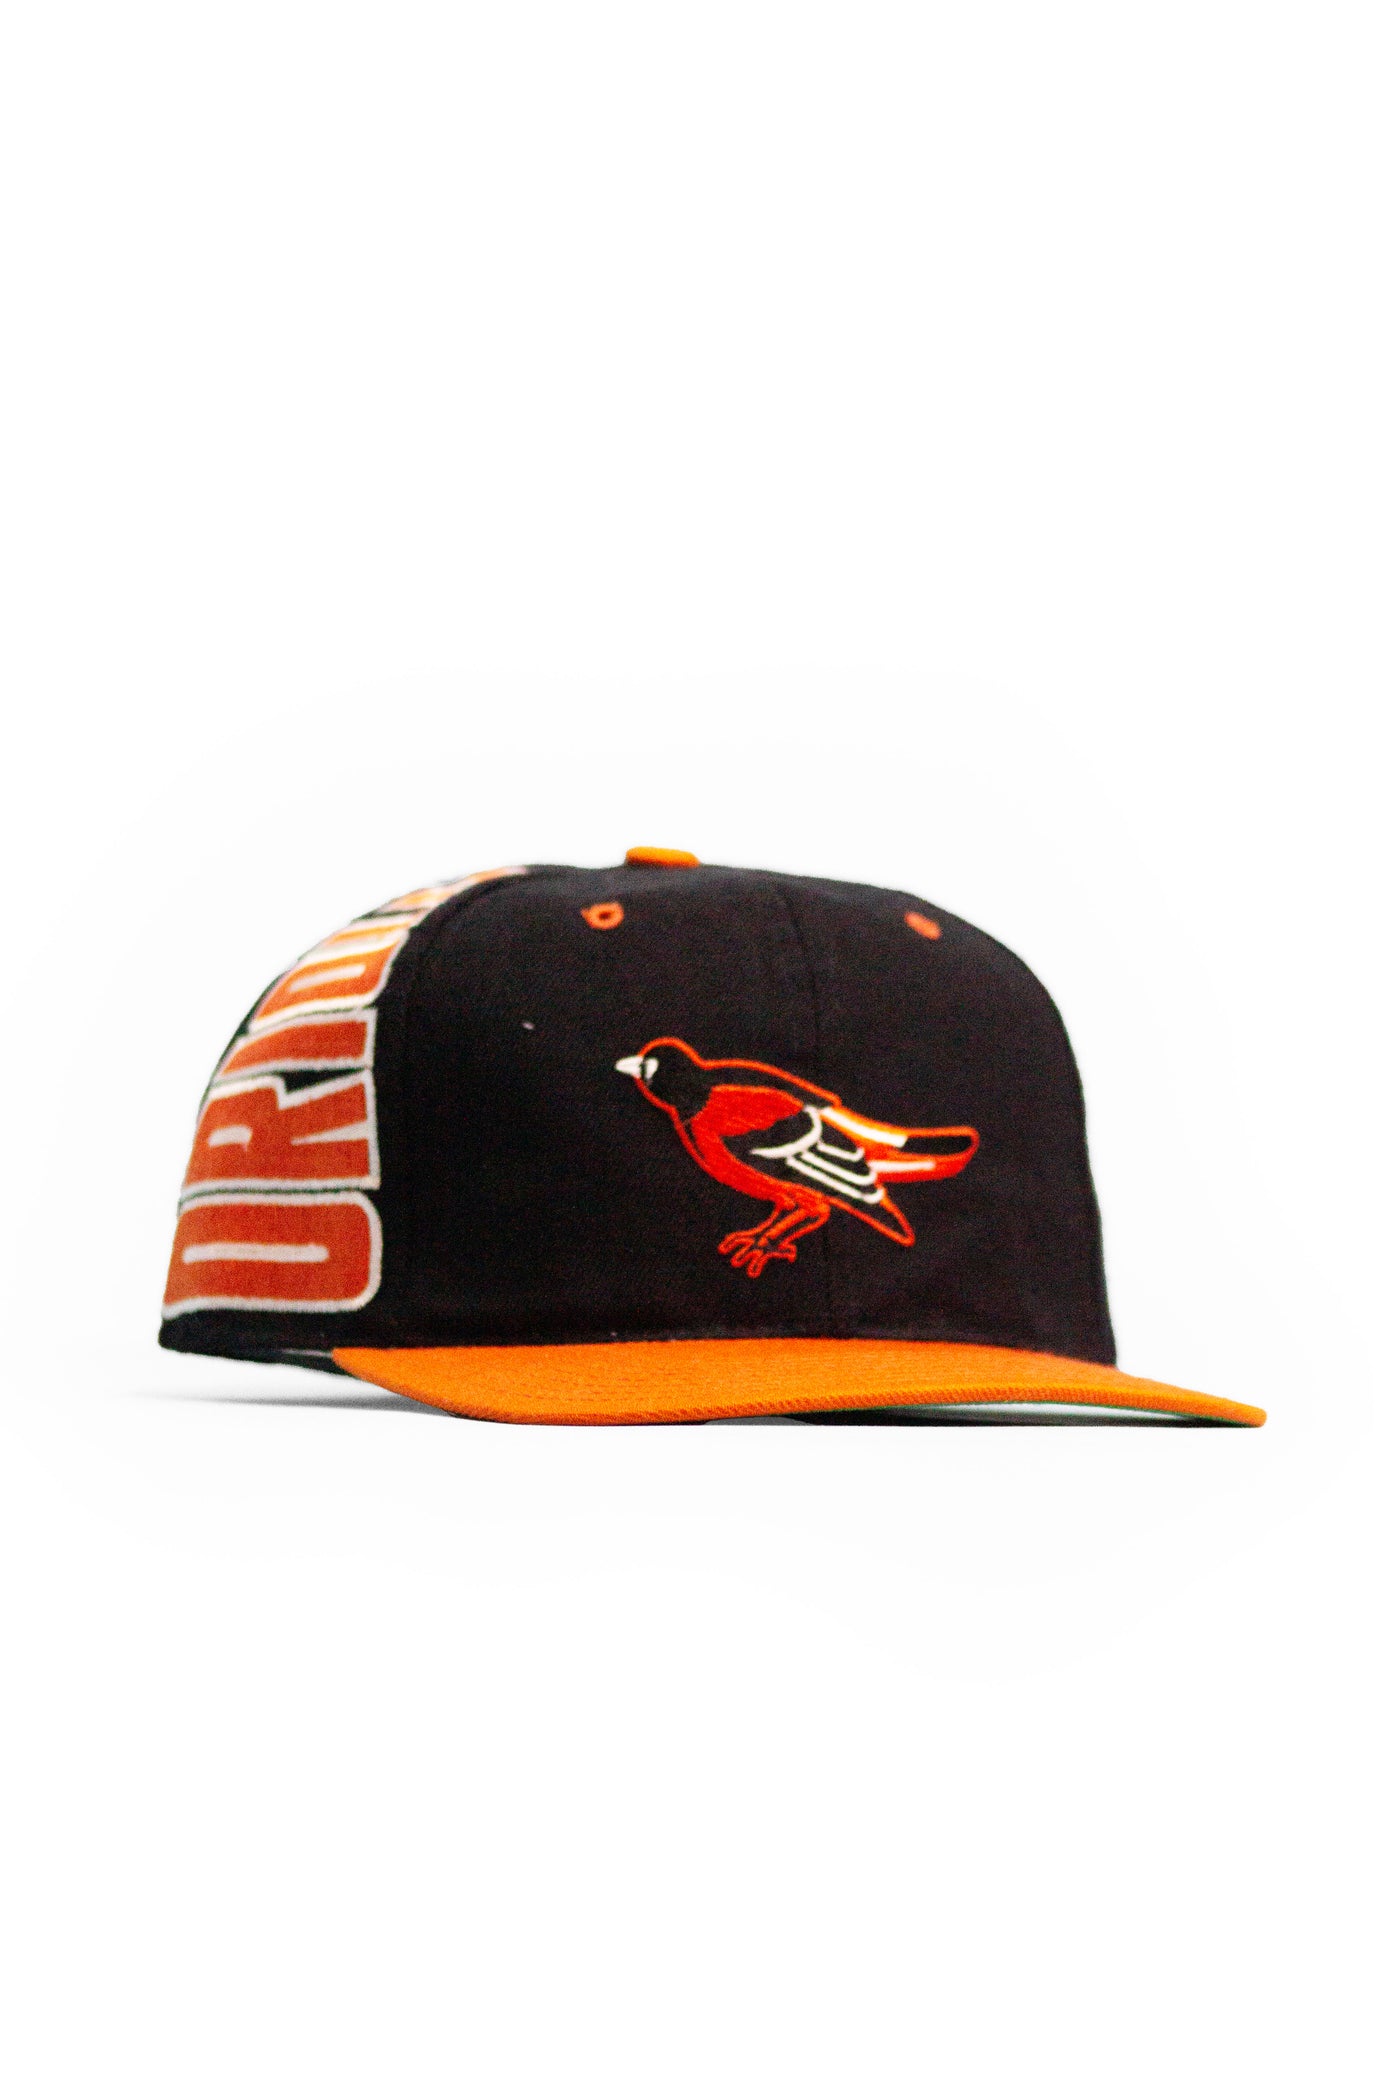 Vintage Baltimore Orioles Fitted Hat